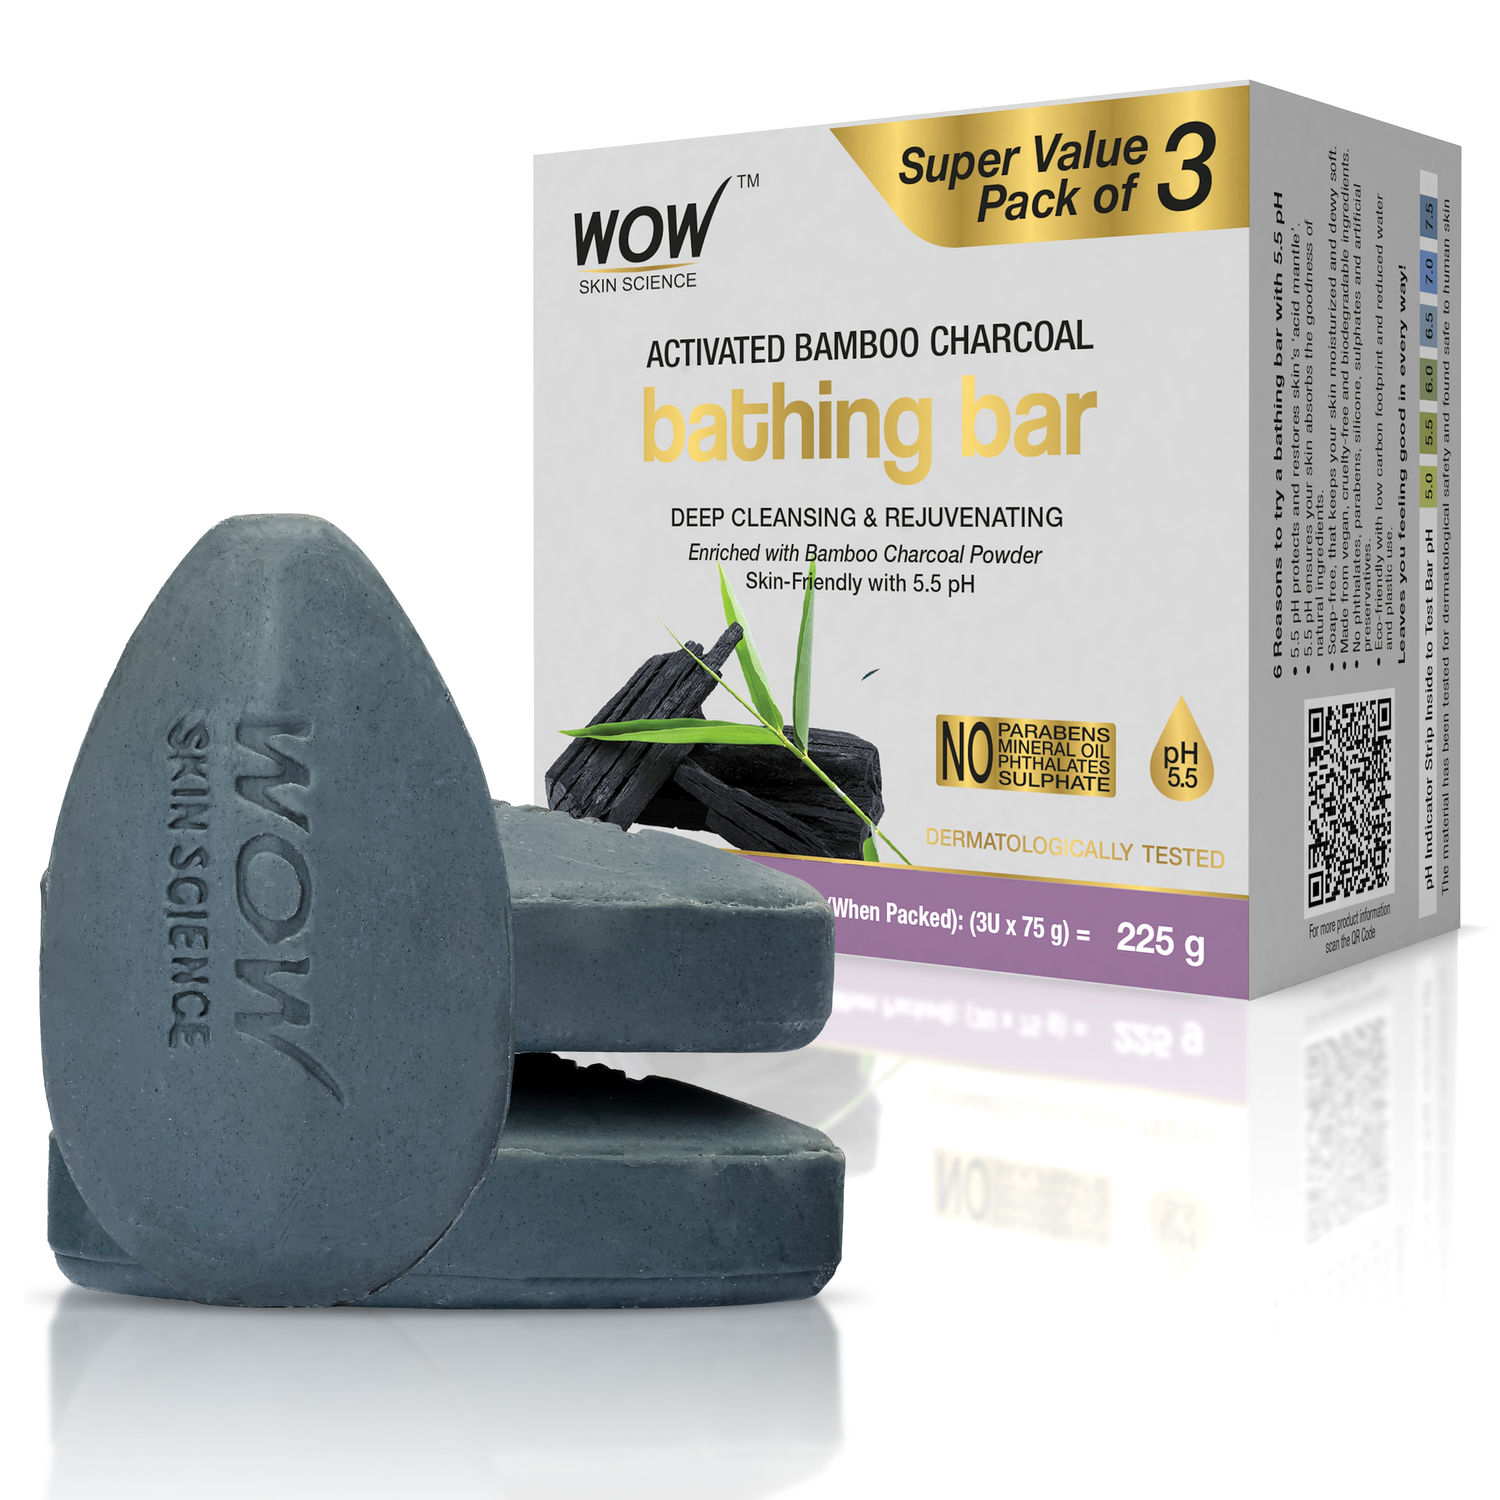 Buy WOW Skin Science Activated Bamboo Charcoal Bathing Bar For Deep Cleansing The Skin - Suitable for All Skin Types - No Phthalates, Parabens, Silicone, Sulphates, Dermatologically Tested - 225 g - Purplle